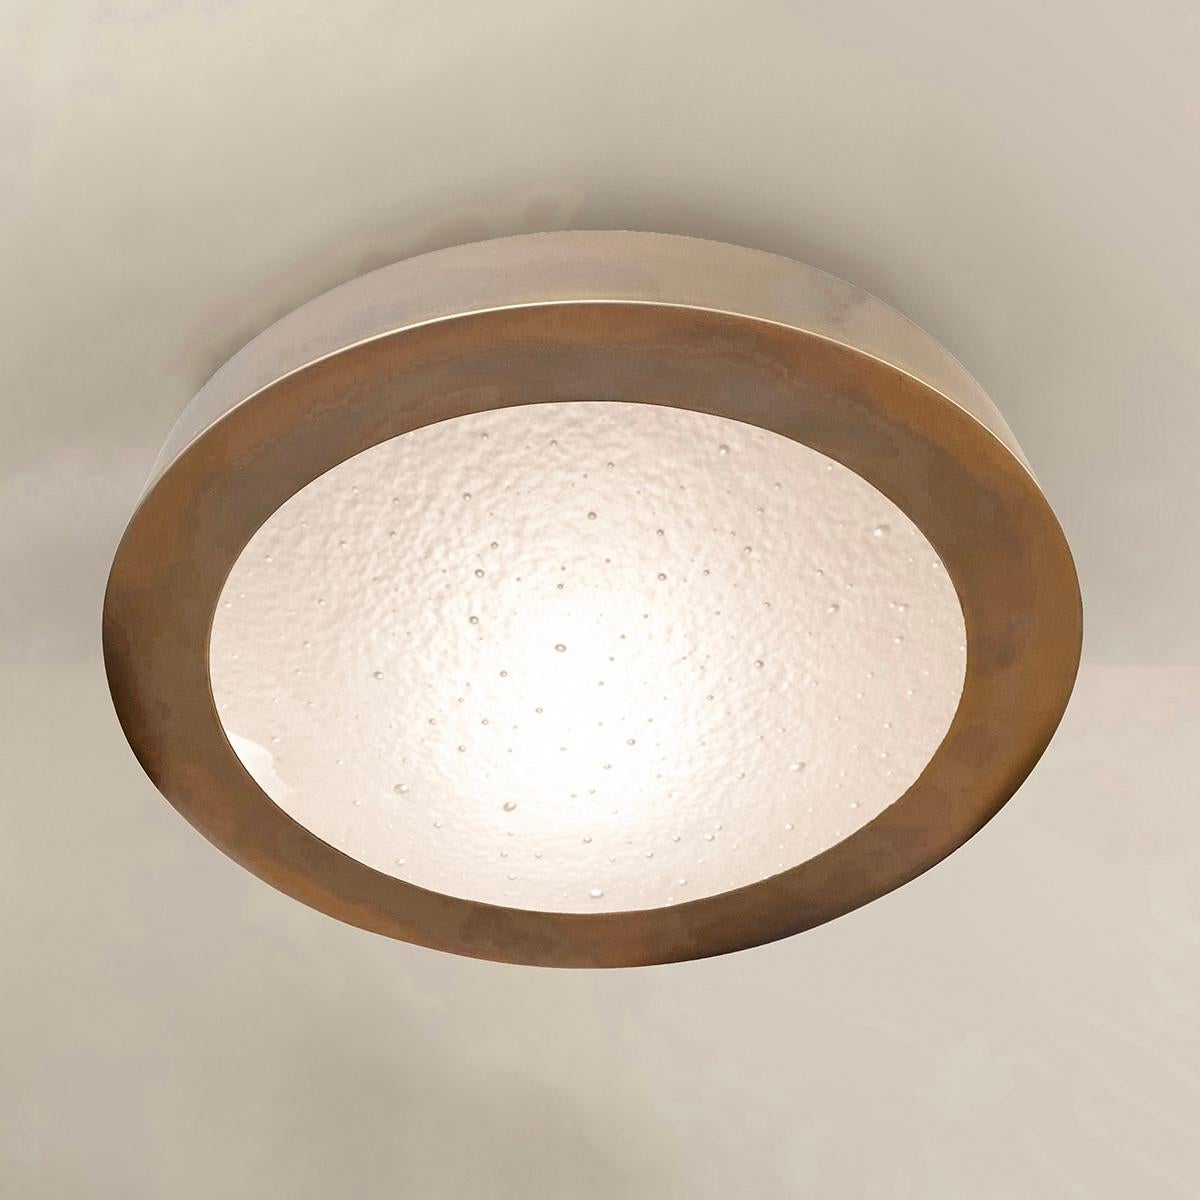 The Tondo Grande flush mount was designed to elavate smaller and low clearance spaces with its 4” drop. The concave bevel holding the convex Murano glass shade and its offset stance make it a highly sculptural piece despite its size. Shown in our